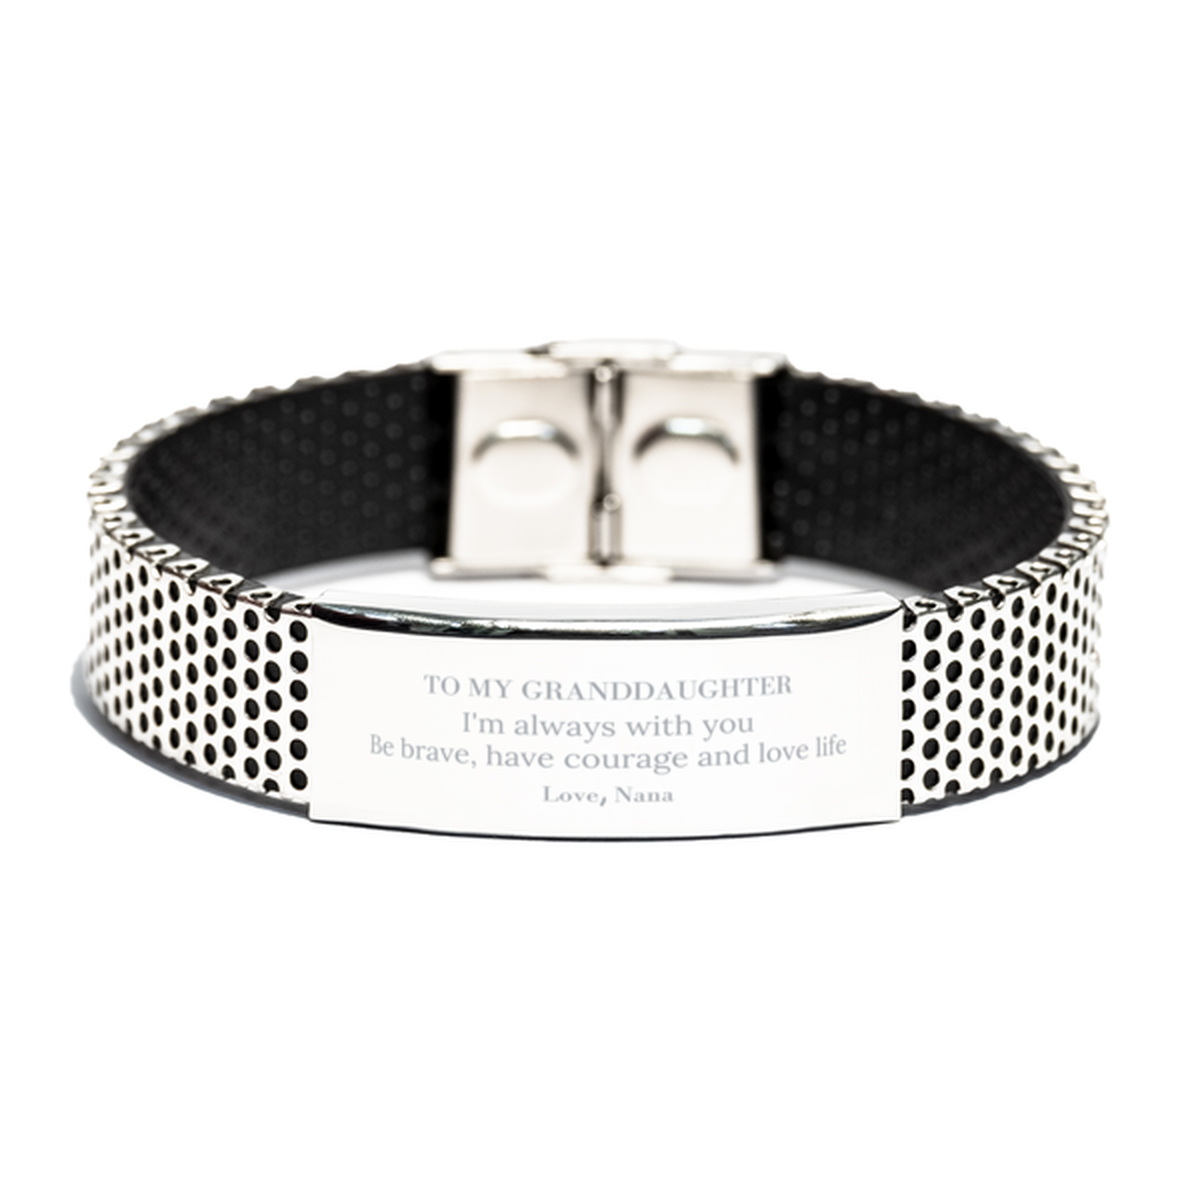 To My Granddaughter Gifts from Nana, Unique Stainless Steel Bracelet Inspirational Christmas Birthday Graduation Gifts for Granddaughter I'm always with you. Be brave, have courage and love life. Love, Nana